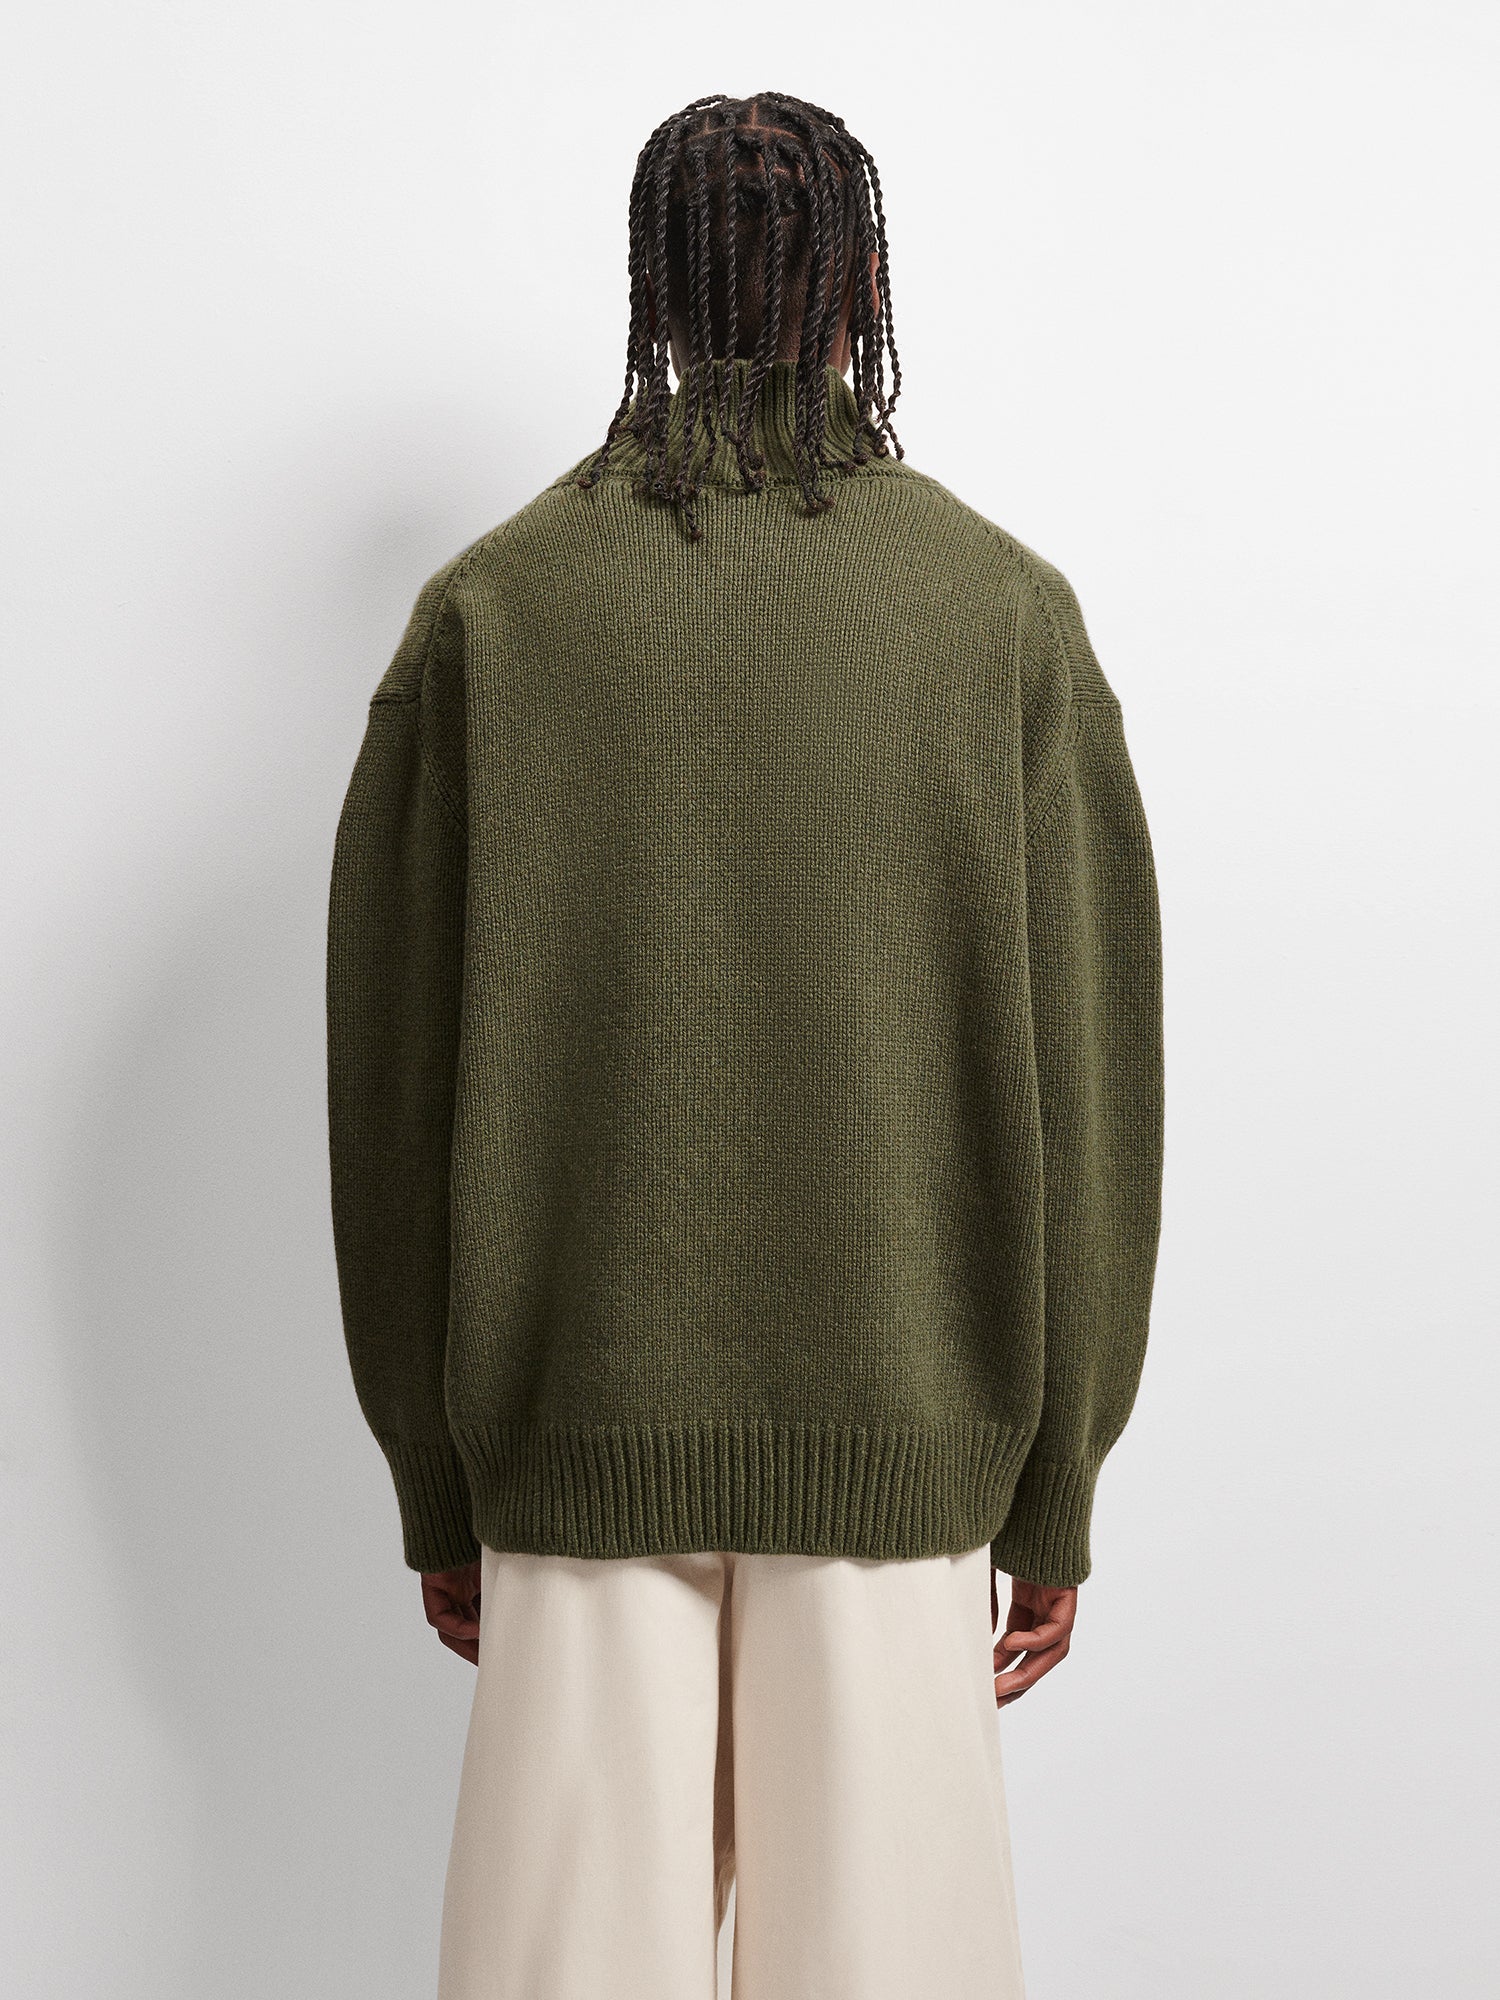 Mens_Recycled_Cashmere_Knit_Chunky_Turtleneck_Sweater_Rosemary_Green-male-2